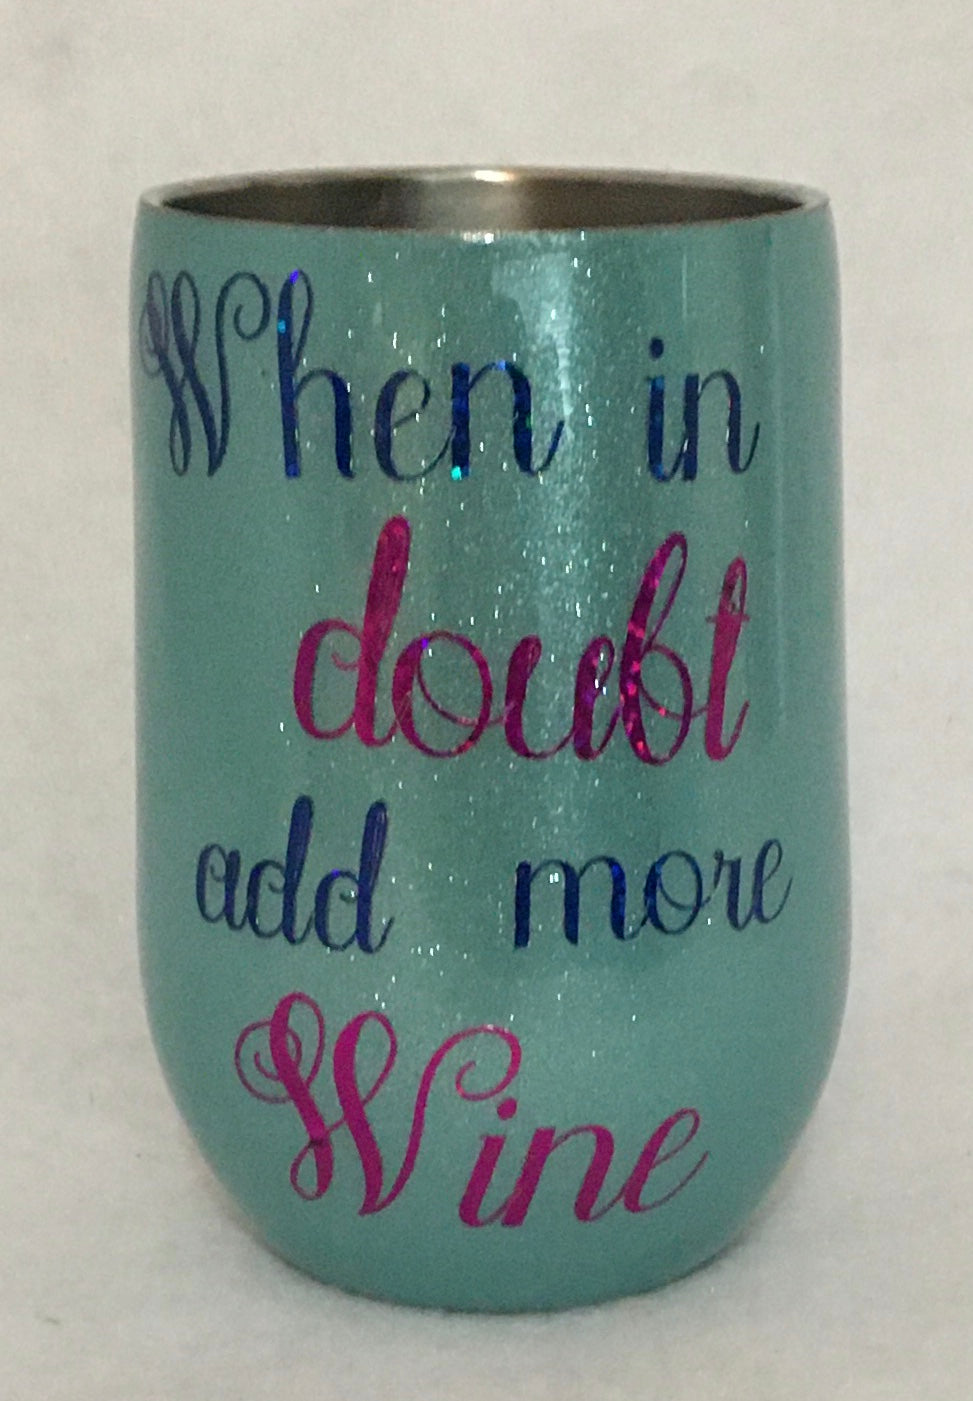 When in doubt add more Wine is a stemless wine cup. This wine tumbler can keep your wine at its perfect temperature. It is decorated in extra fine glitter with vinyl lettering and FDA-approved epoxy. This wine tumbler can hold 11 ounces. These tumblers can be ready in one to two weeks. We can personalize and customize these tumblers. We carry several different stainless tumblers in a variety of sizes. Cancellations can only be made if they are on the same business day as the initial order